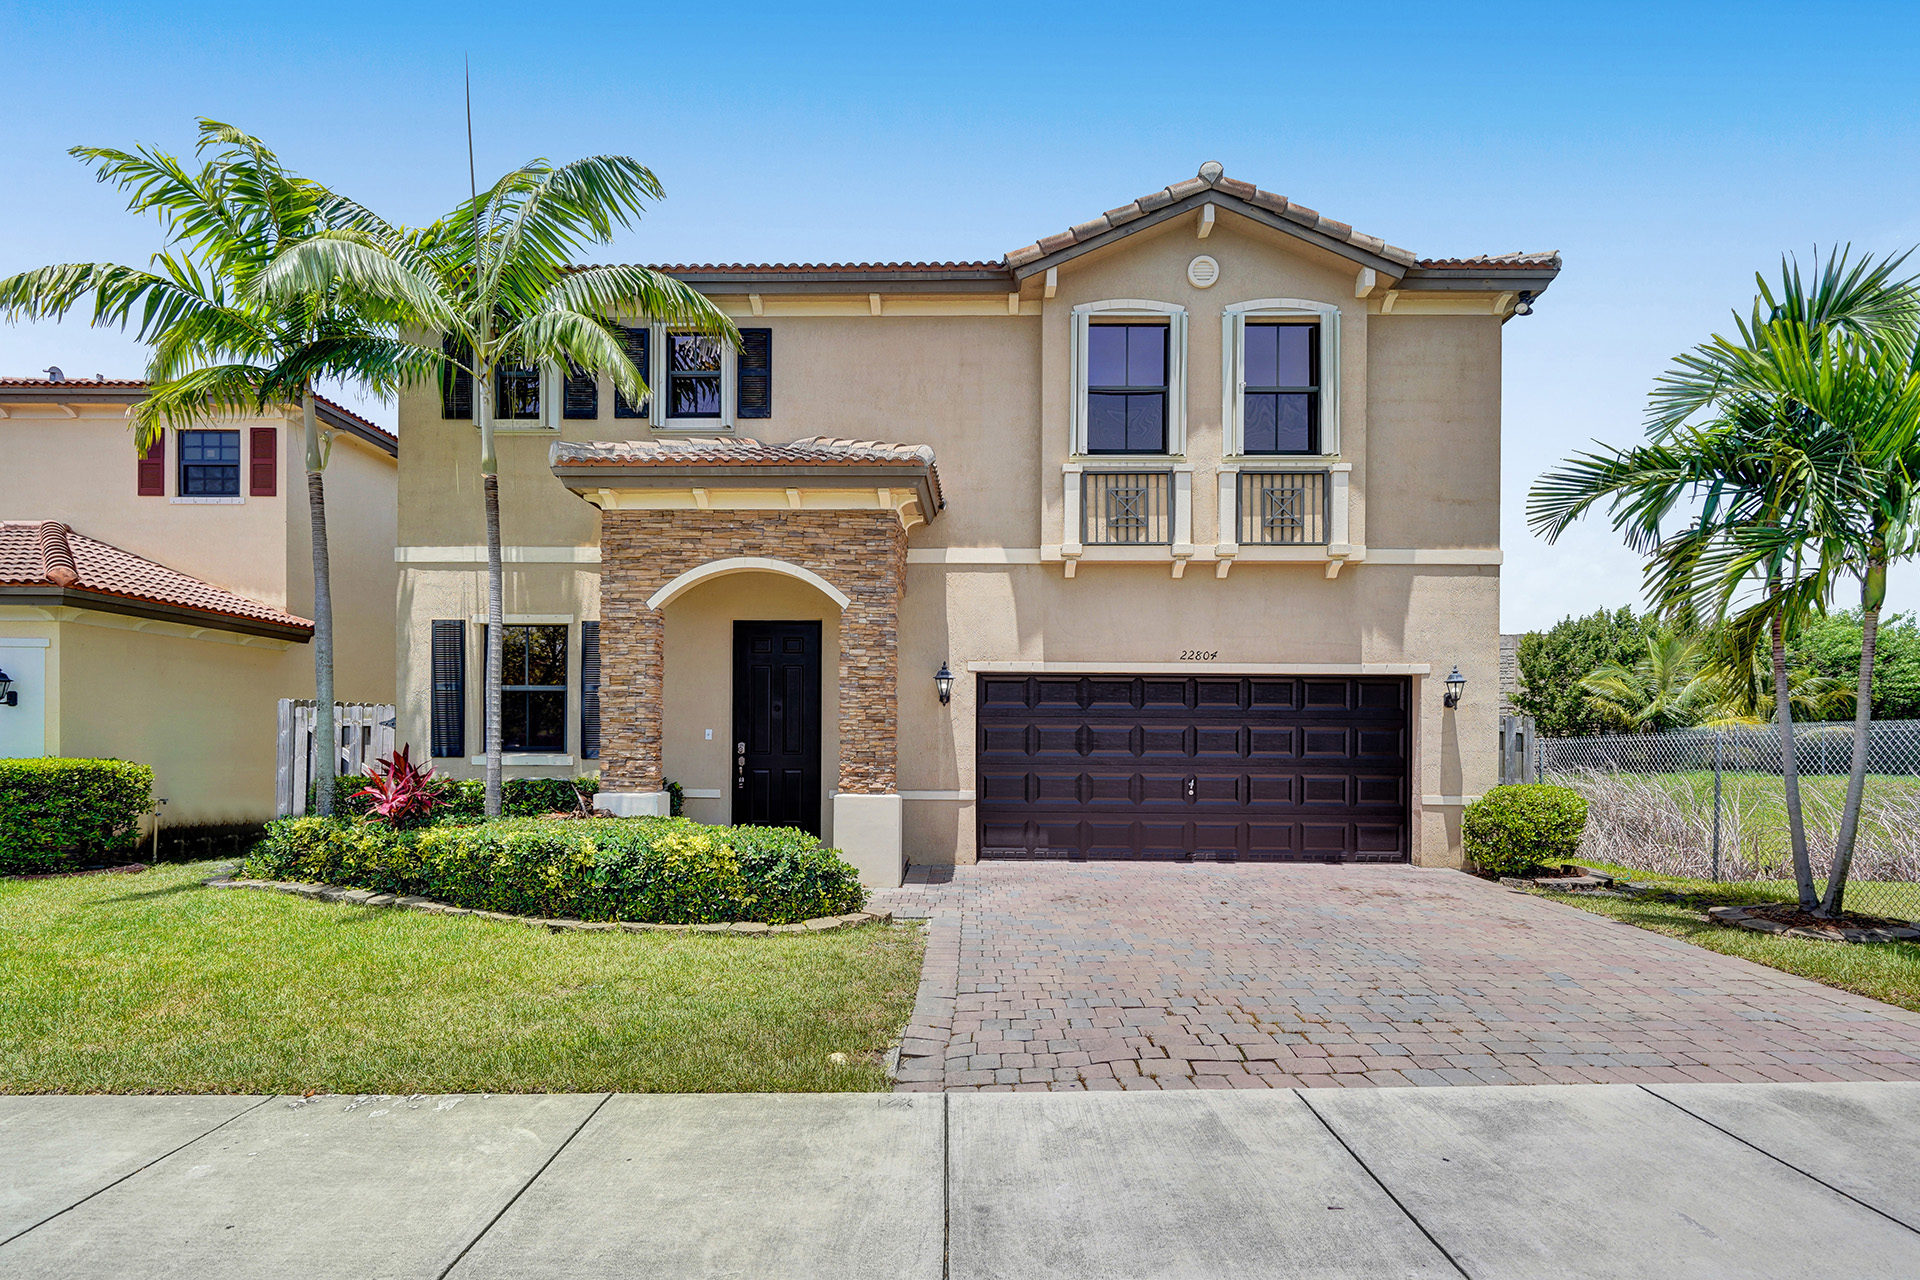 22804 SW 105th Ave. Cutler Bay Florida, 33309 Open Sunday July 19th From 12:00-4:00 pm